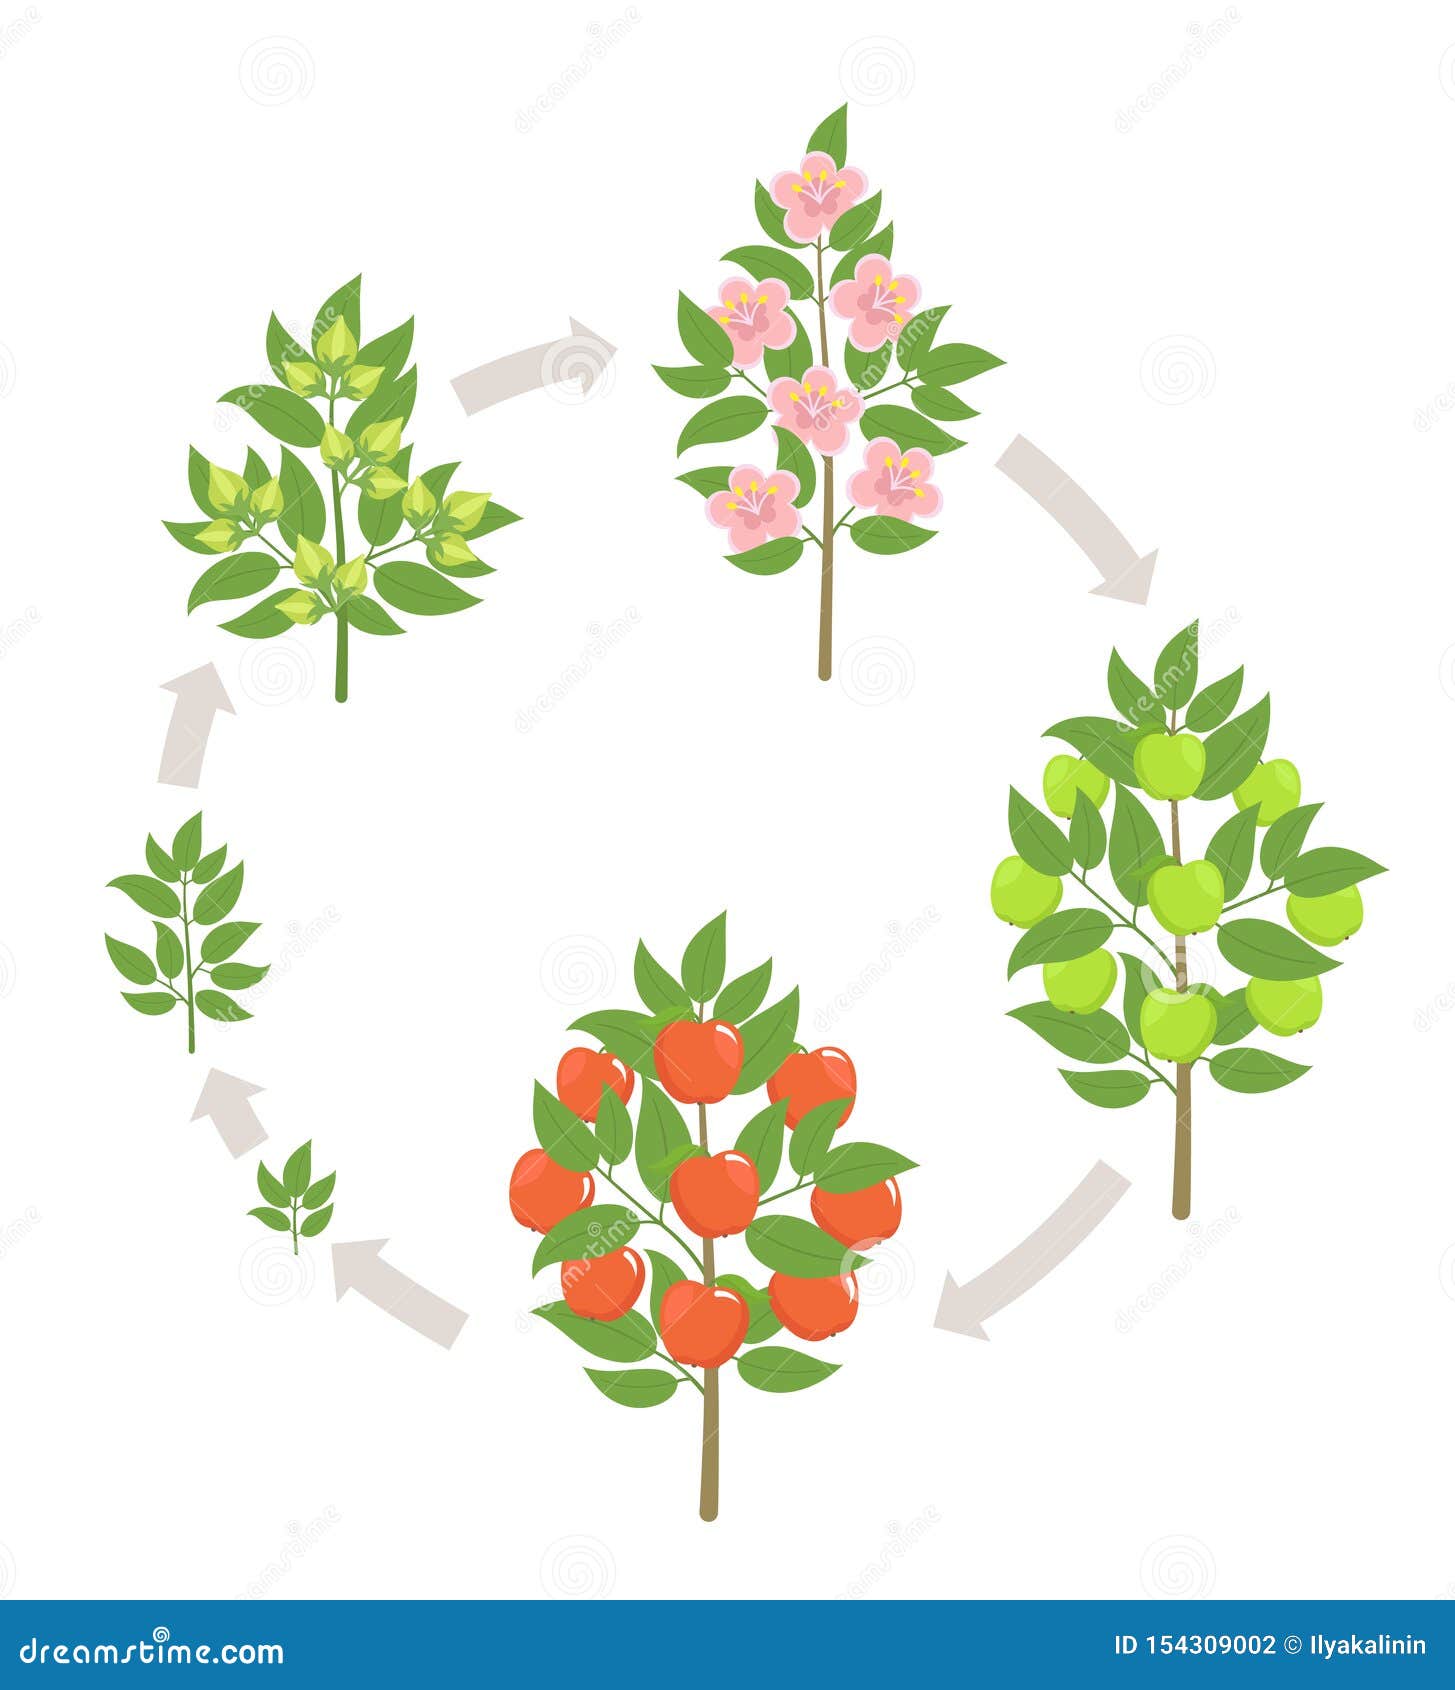 Apple Tree Growth Stages. Vector Illustration. Ripening Period Progression.  Fruit Tree Life Cycle Animation Plant Stock Vector - Illustration of  farming, period: 154309002